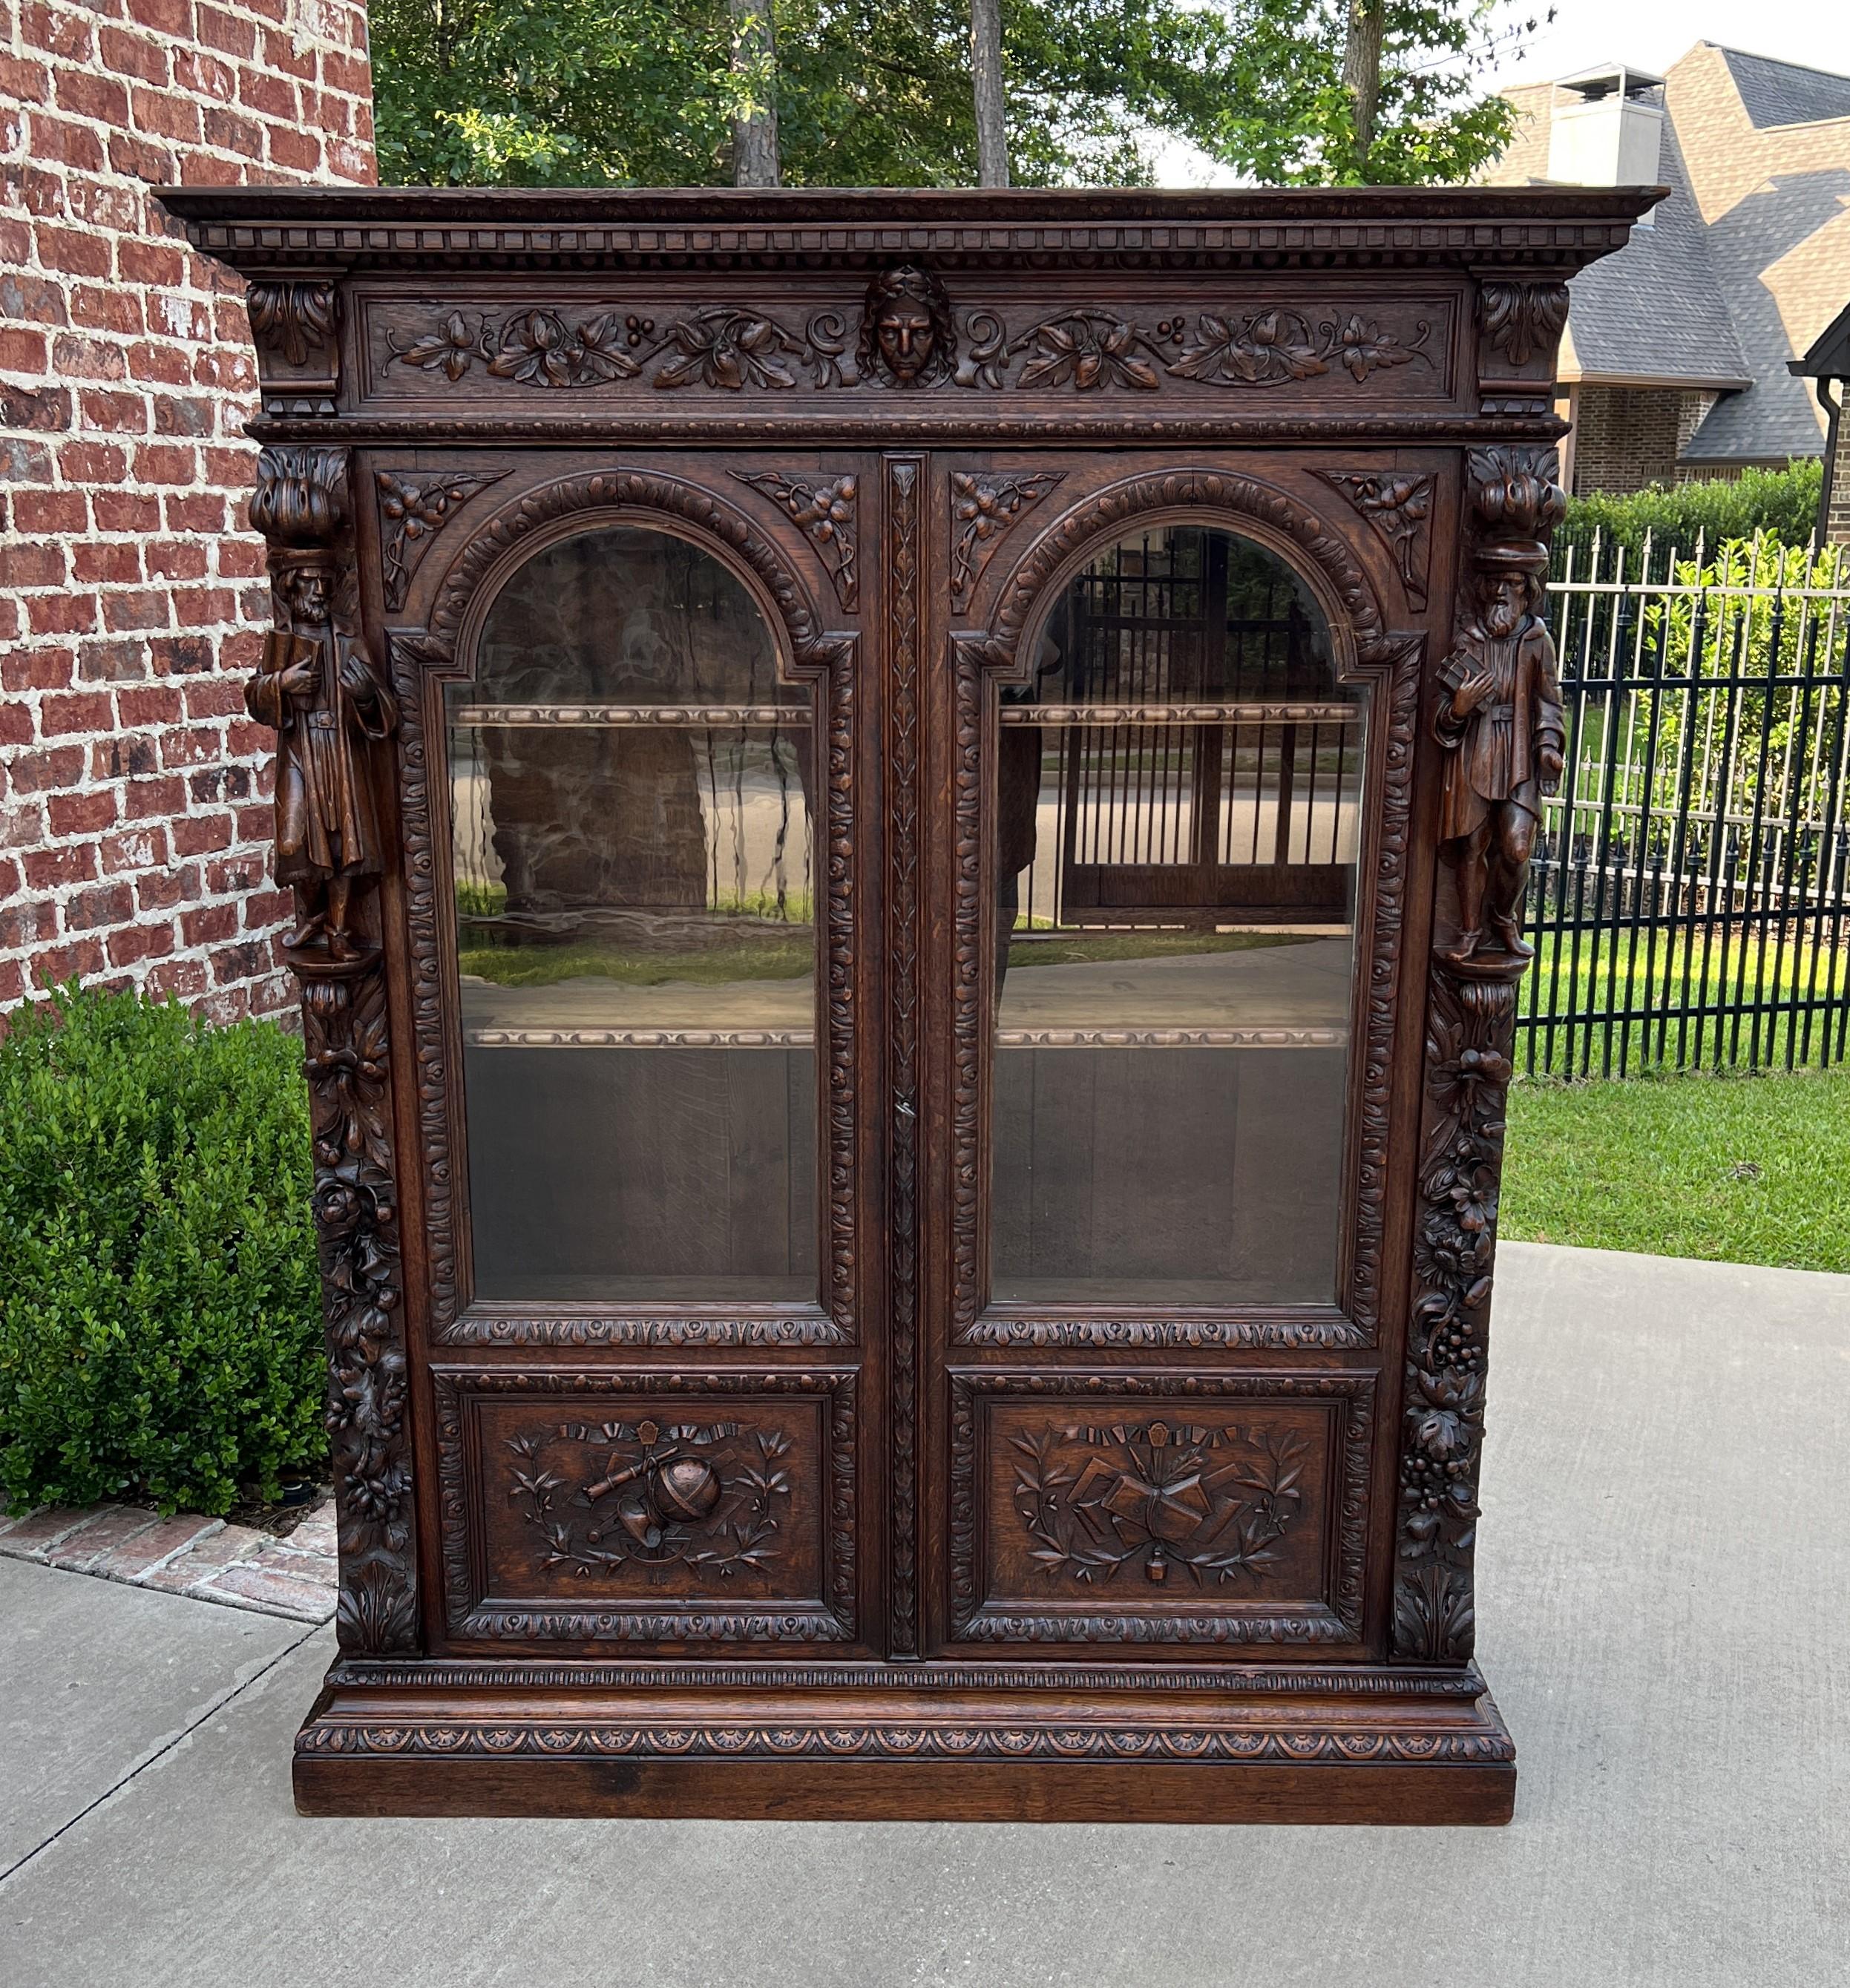 EXCEPTIONAL 19th century Antique French Oak Renaissance Revival Double Door Bookcase, Display Cabinet or Scholar's Cabinet~~
 circa 1880s 

 This is only one of multiple exquisite pieces recently received from our European shipper~~wonderful